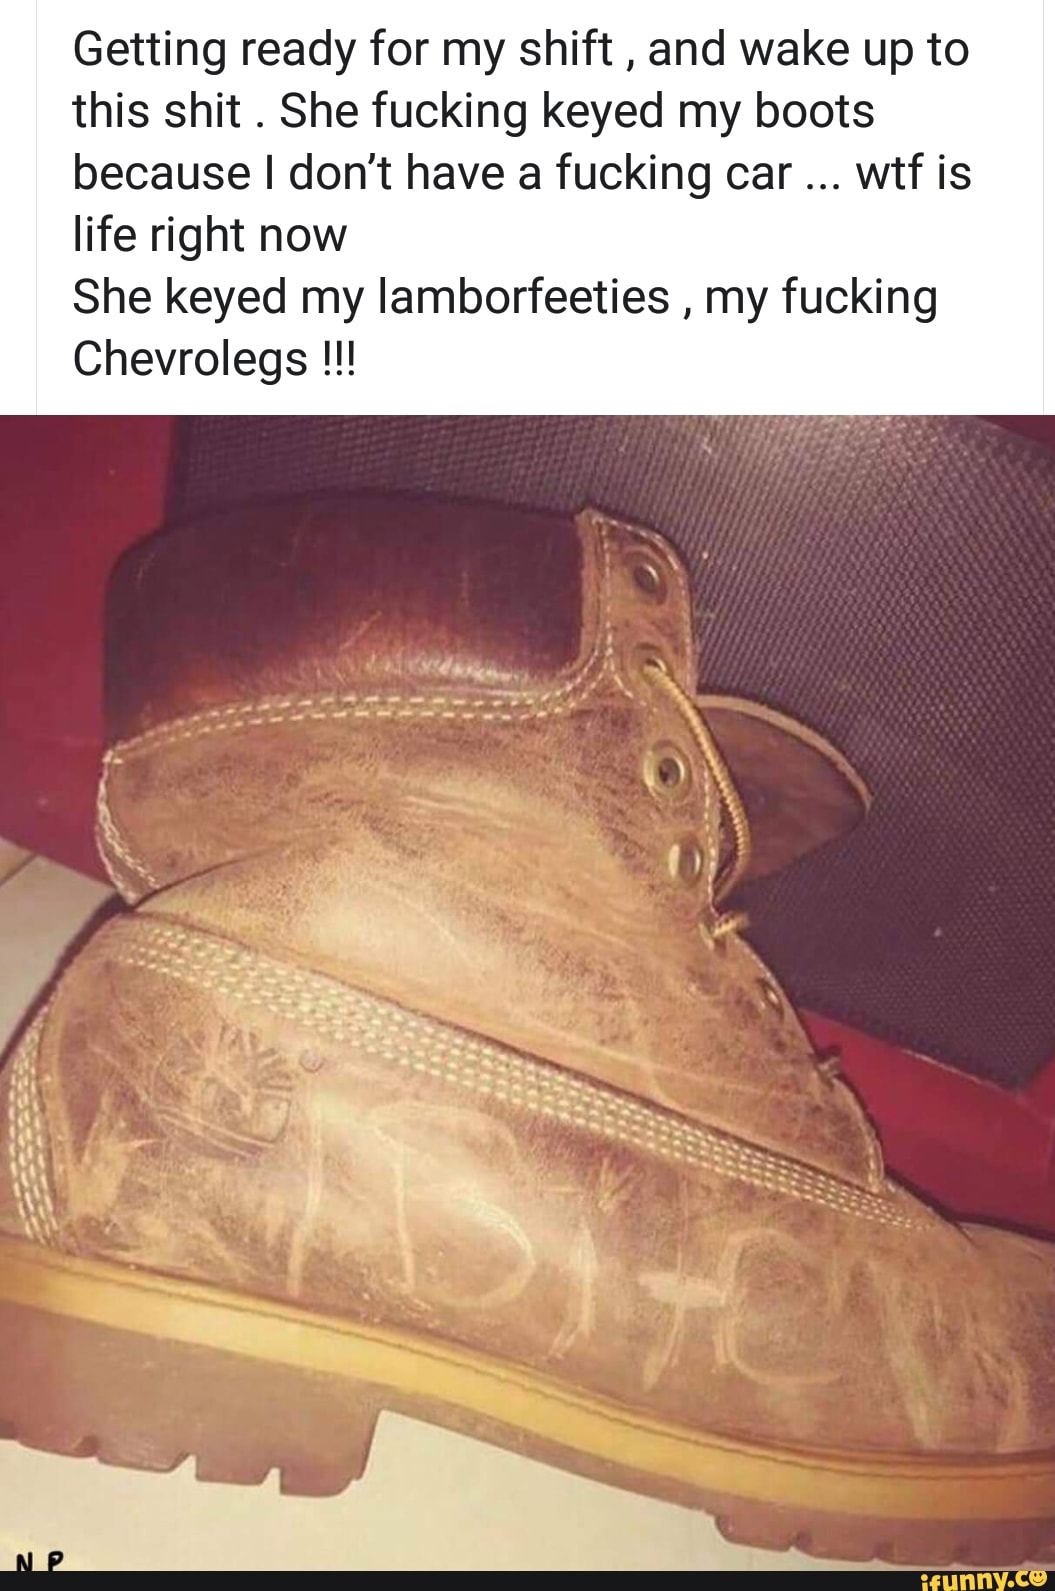 Lamborfeeties etc. isn't funny, wish that wasn't a thing. But funny nonetheless